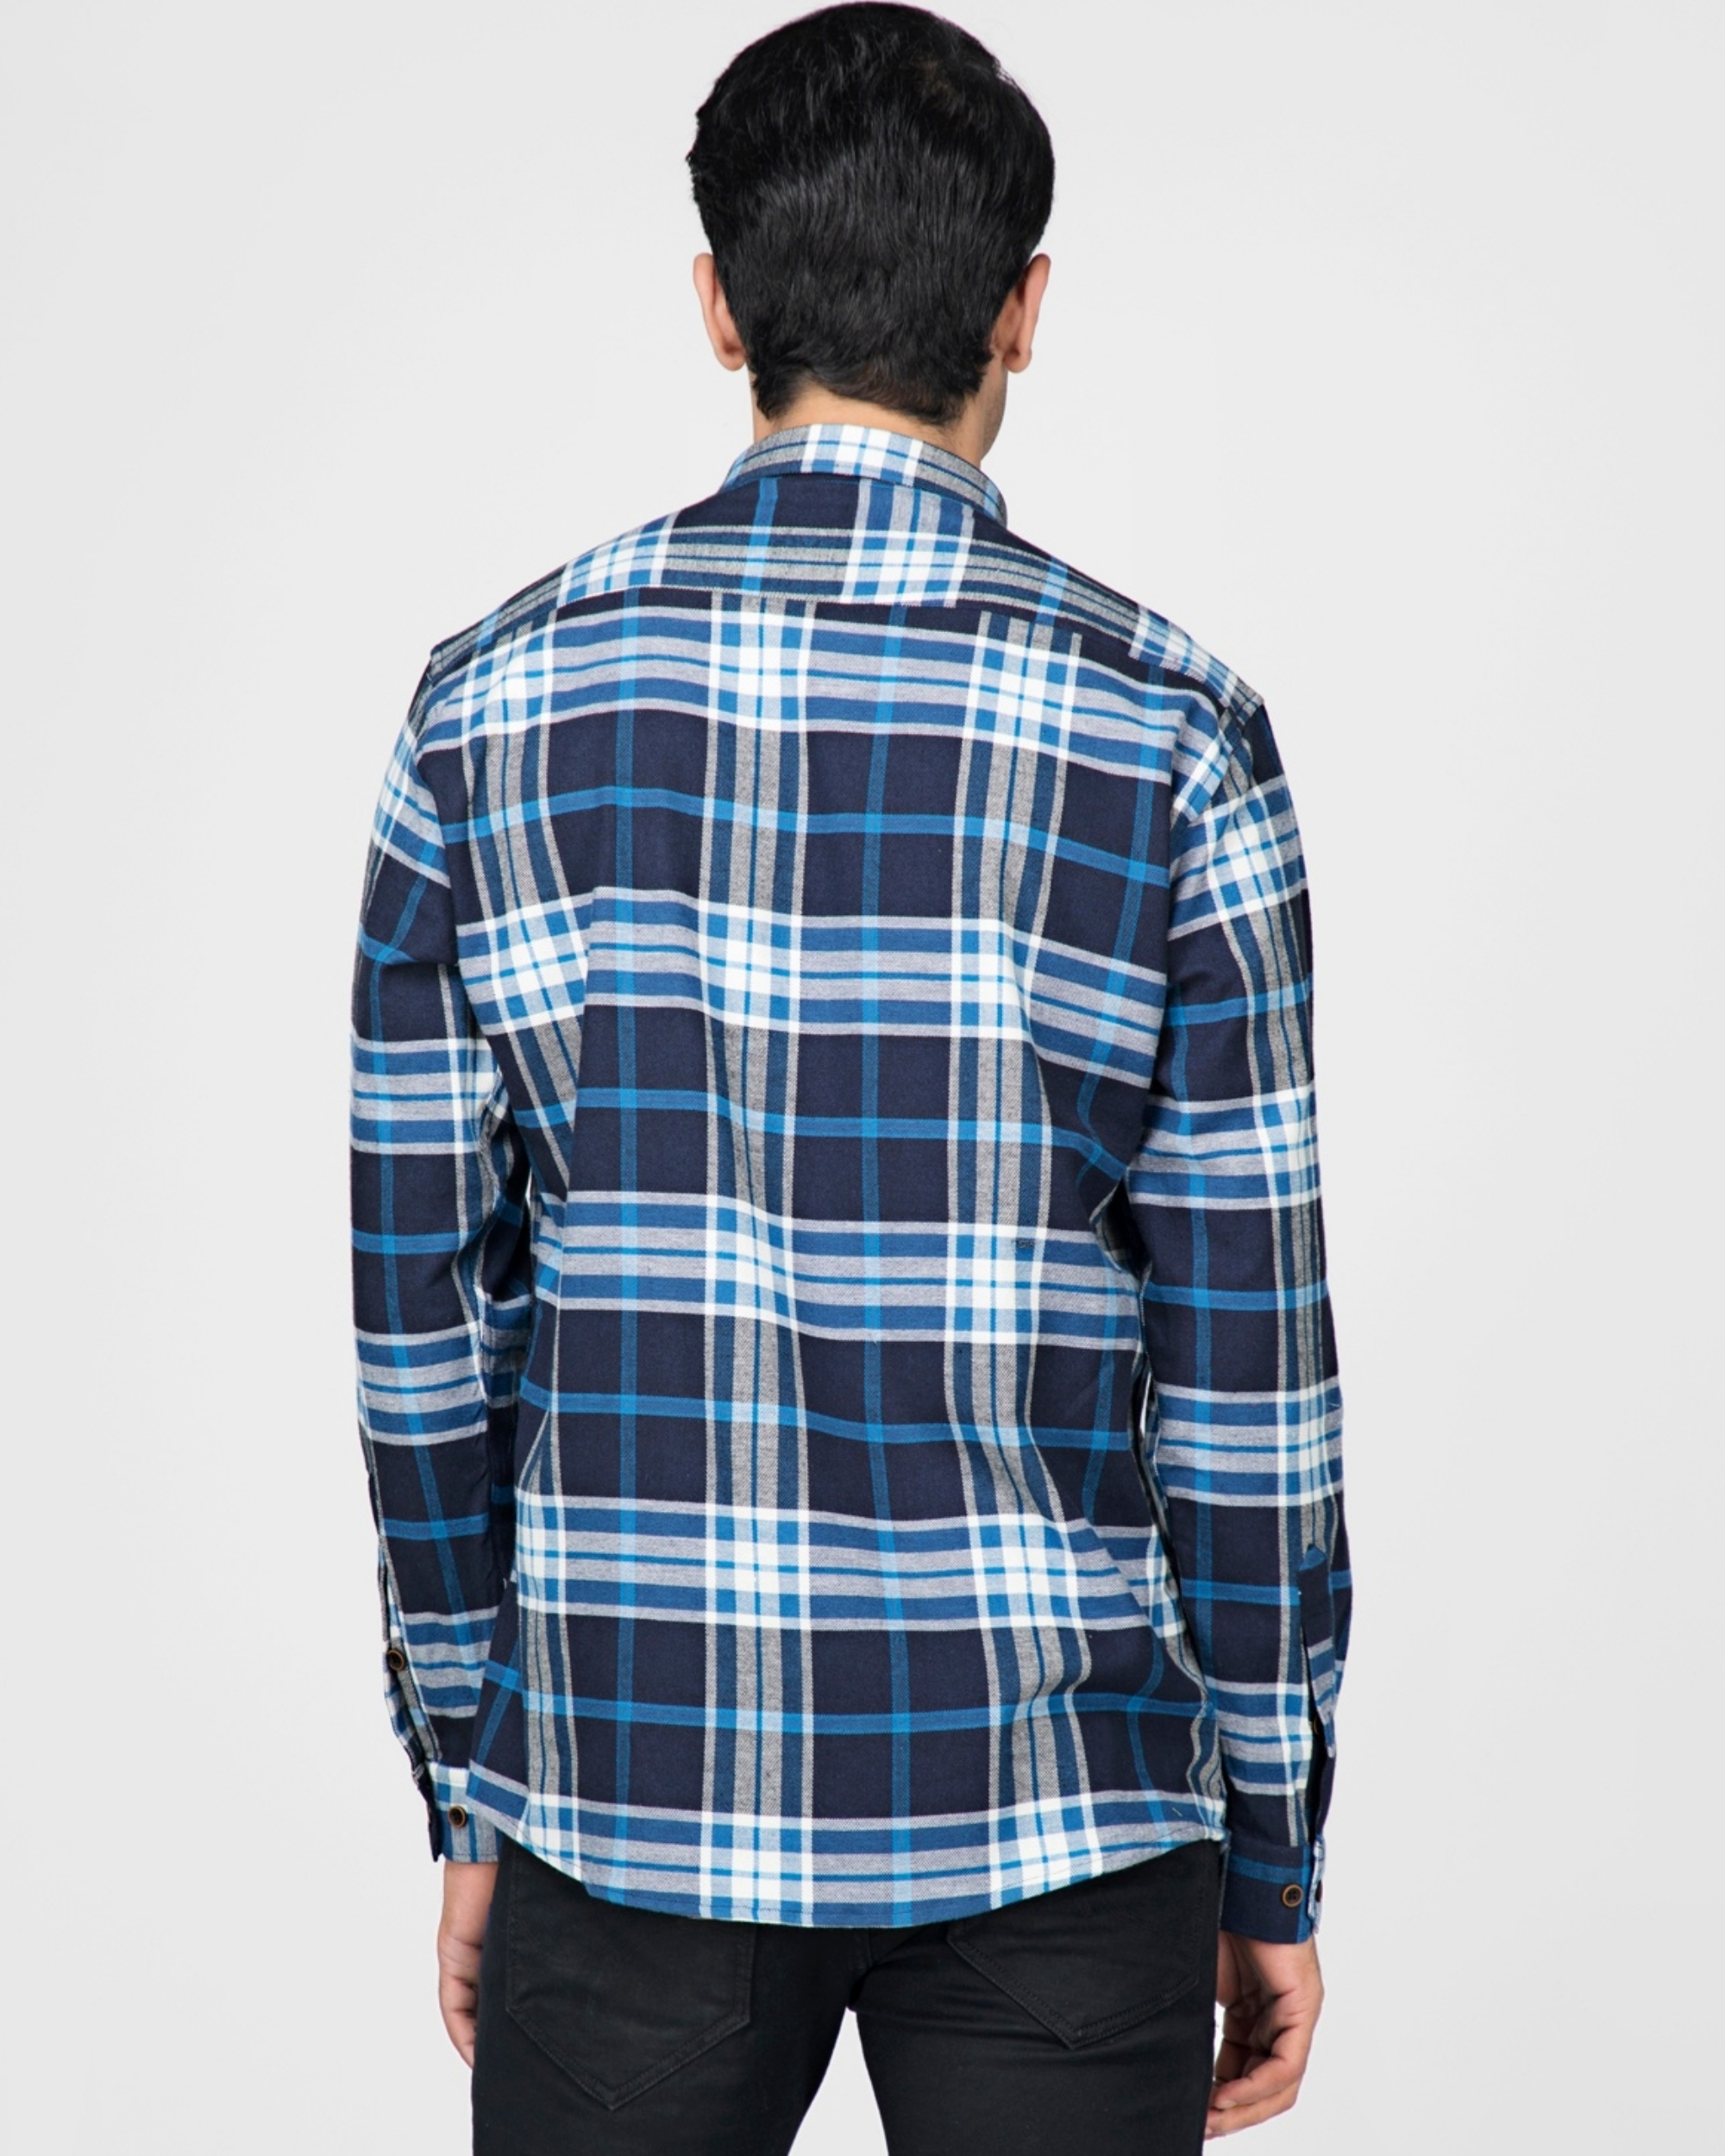 Navy blue and white plaid shirt by Green Hill | The Secret Label